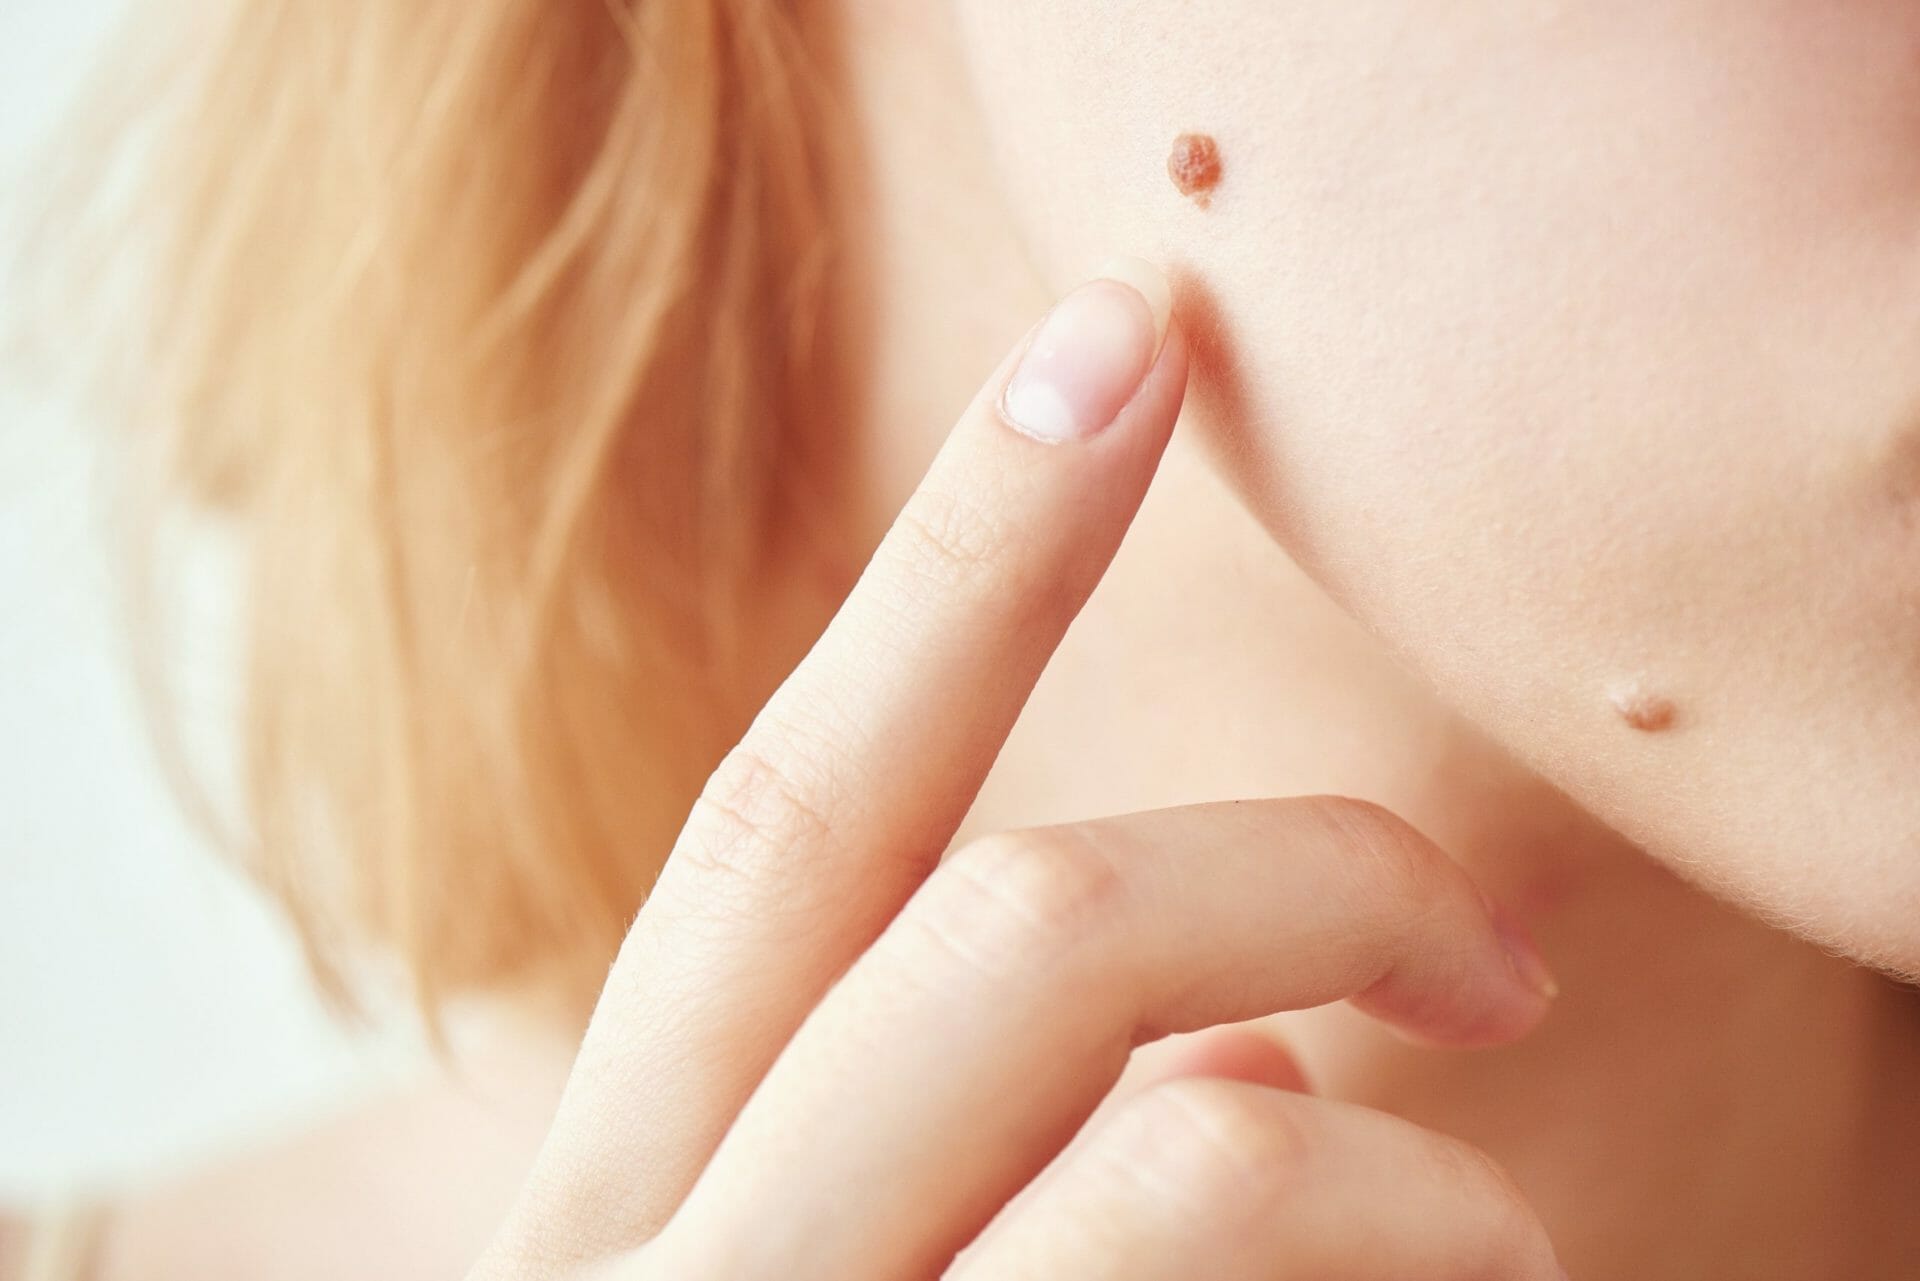 Mole Removal: What You Can Expect Before, During, and After   SELF